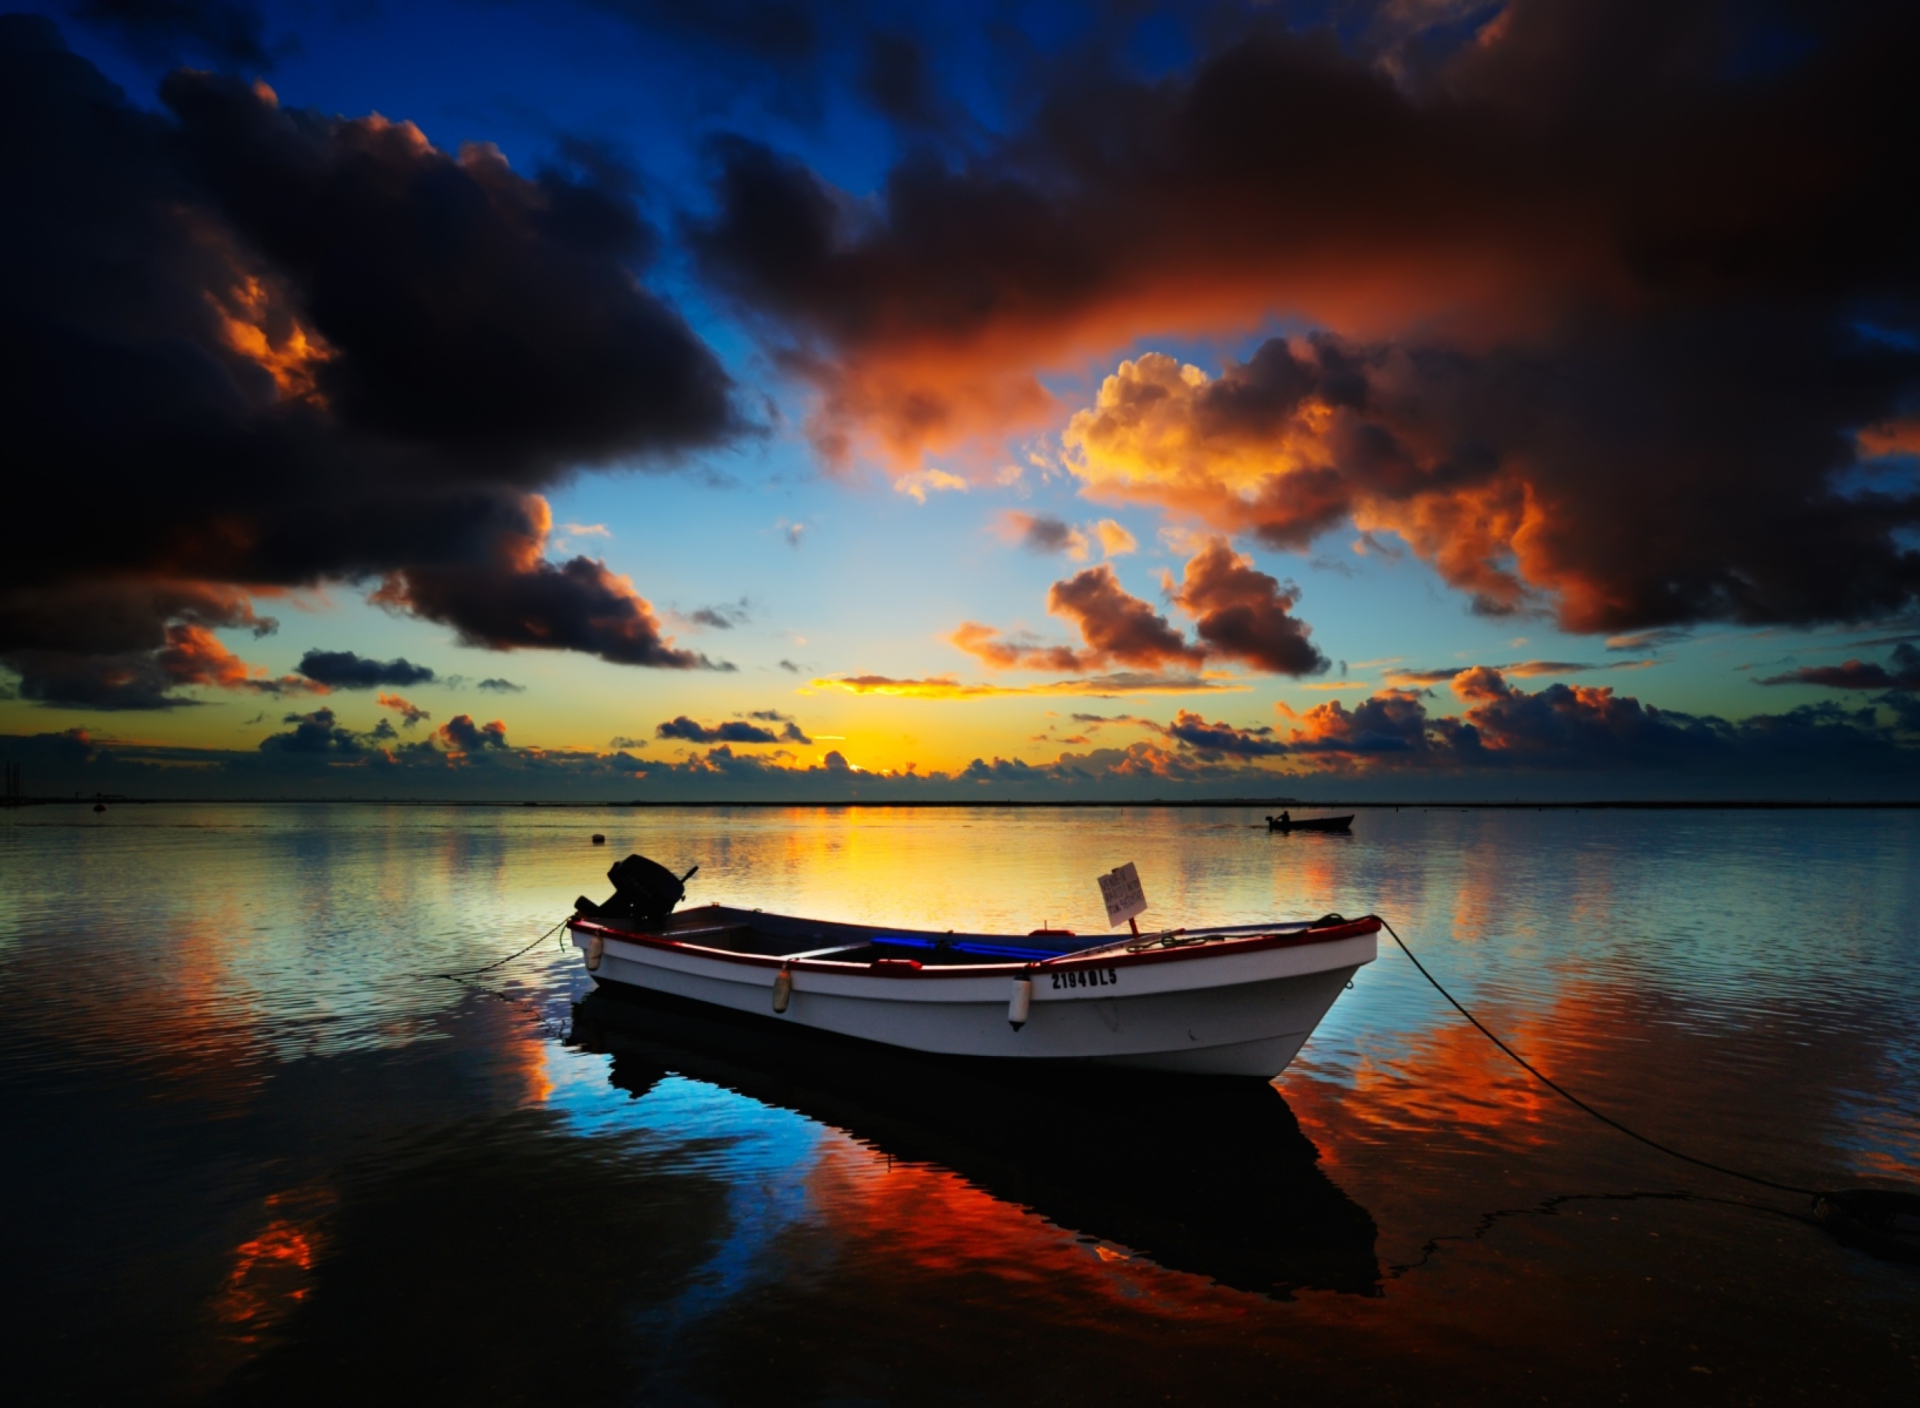 Das Boat In Sea At Sunset Wallpaper 1920x1408